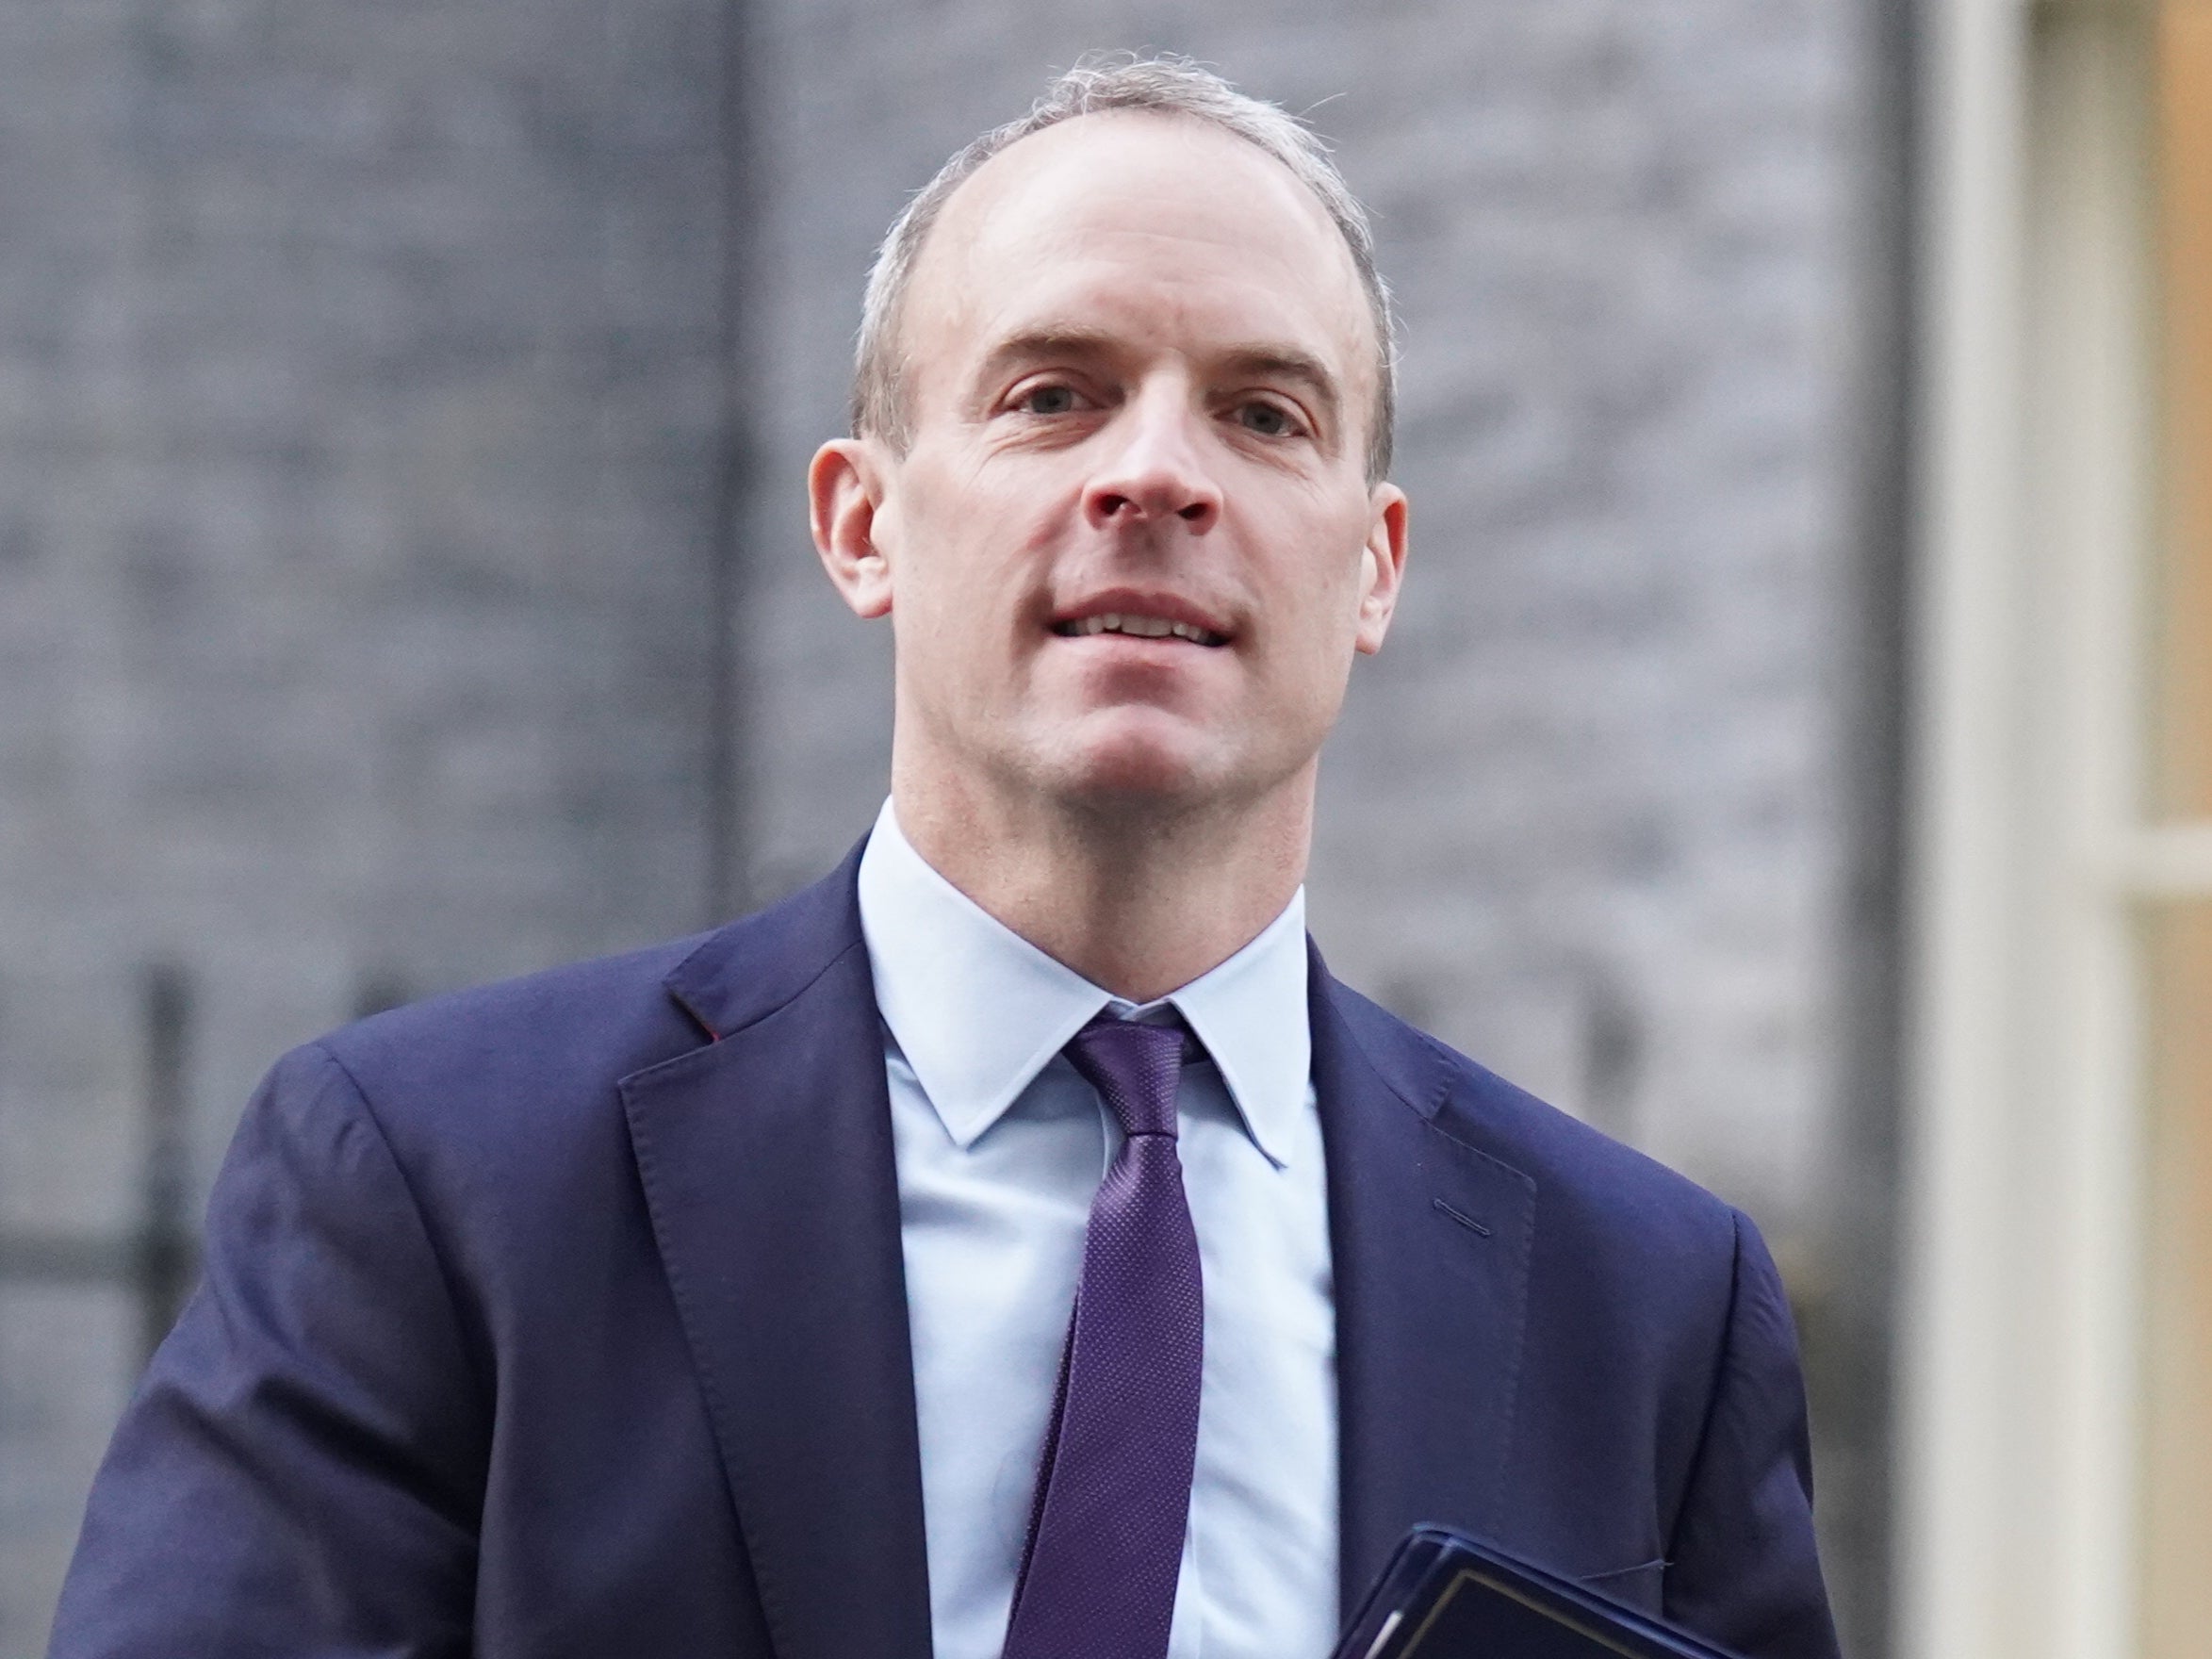 Deputy prime minister and justice secretary Dominic Raab